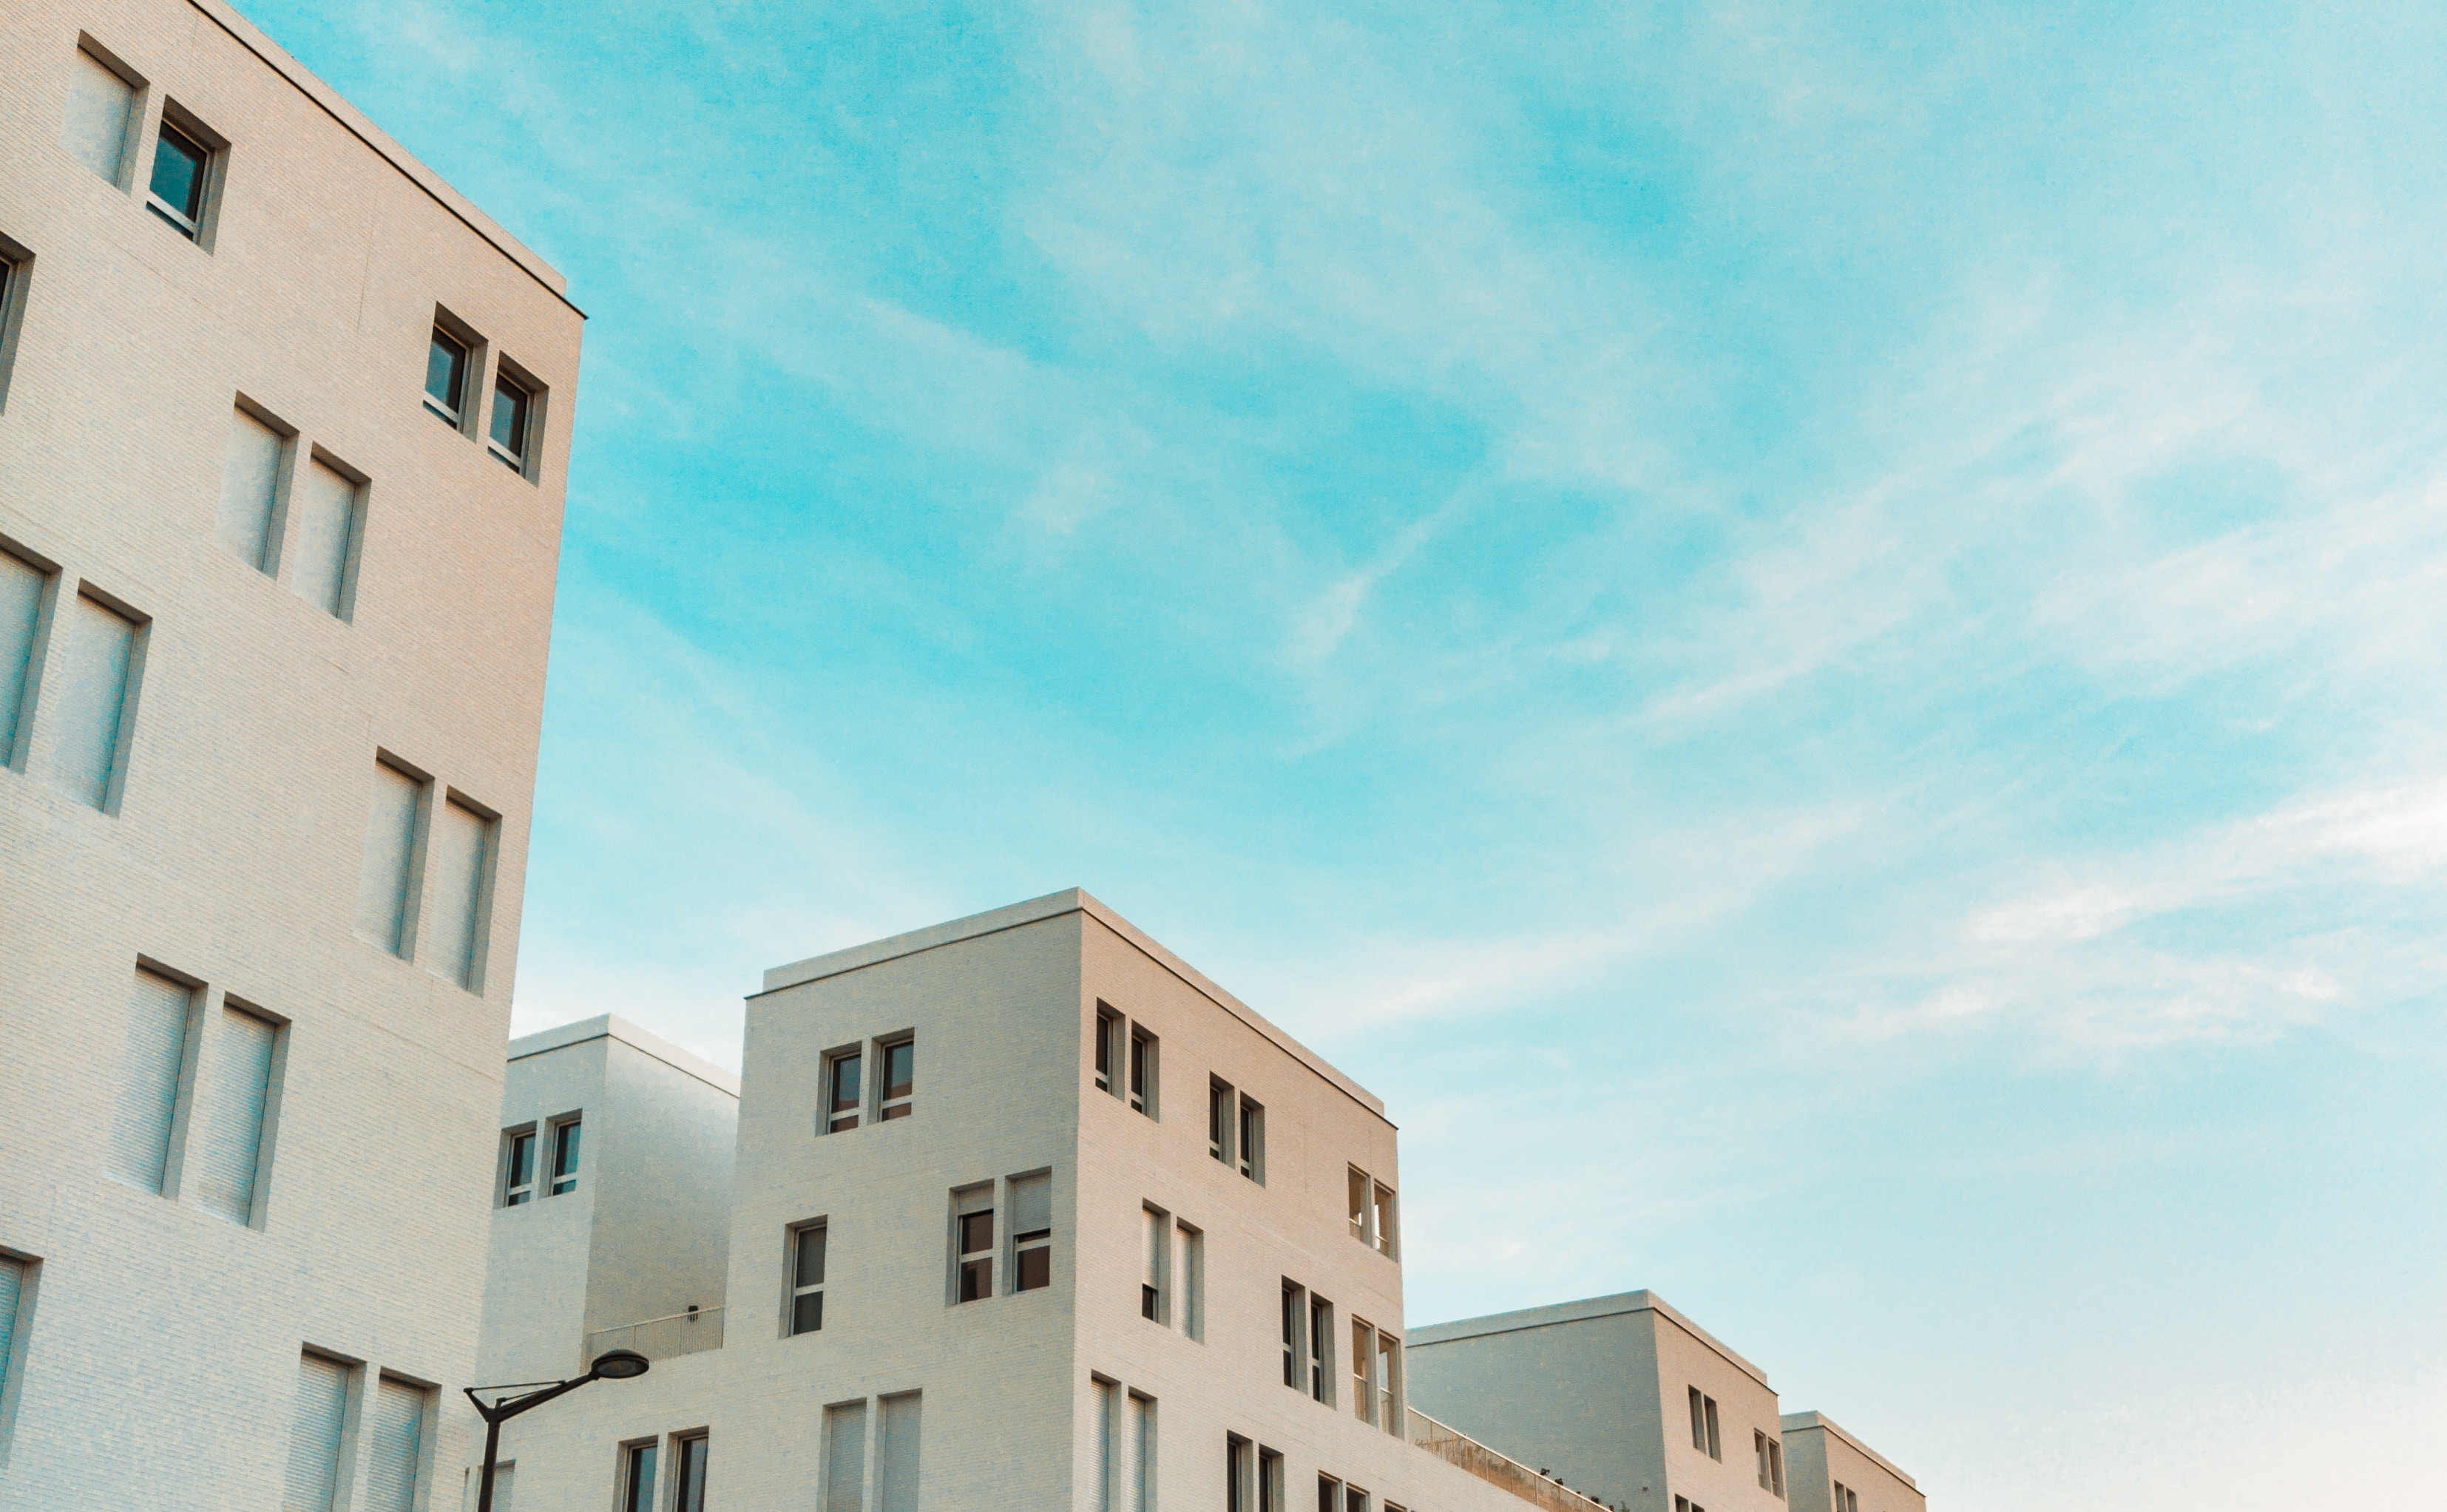 During the recent Urban Land Institute Housing Opportunity 2019 conference, a panel of experts discussed the "increasingly overlapping concerns of employers and the need for affordable housing."